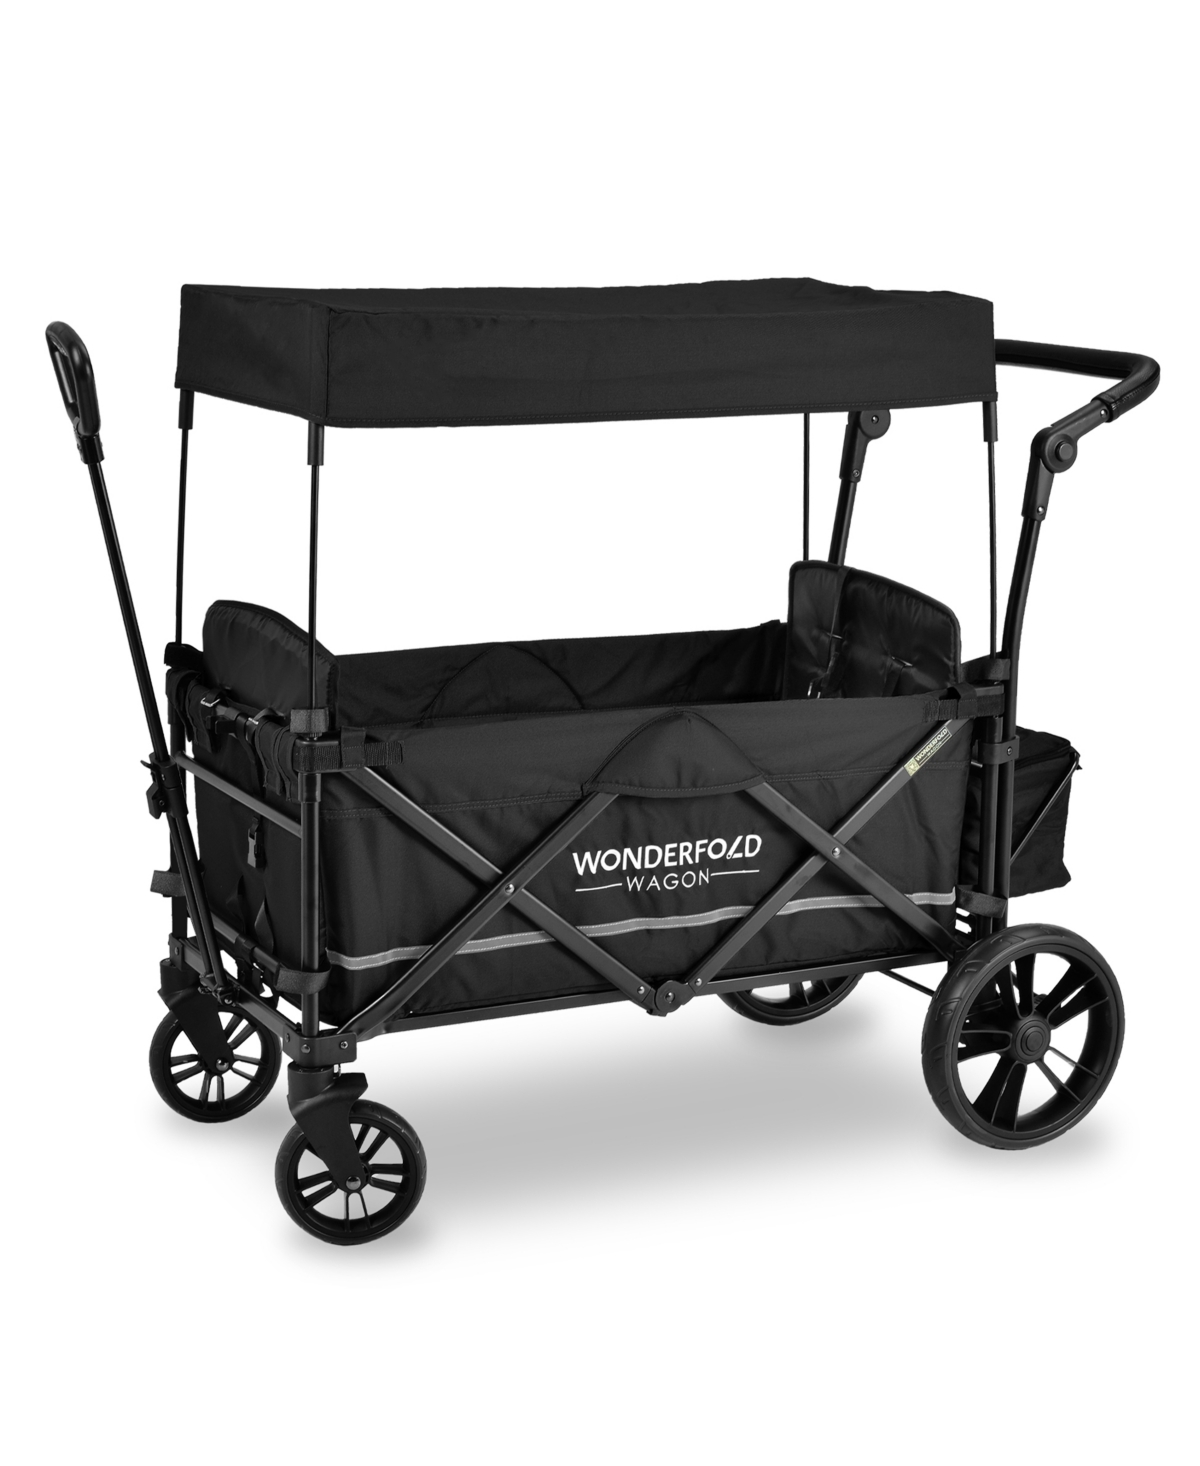 Wonderfold Wagon X2 Push And Pull Double Stroller Wagon In Pitch Black